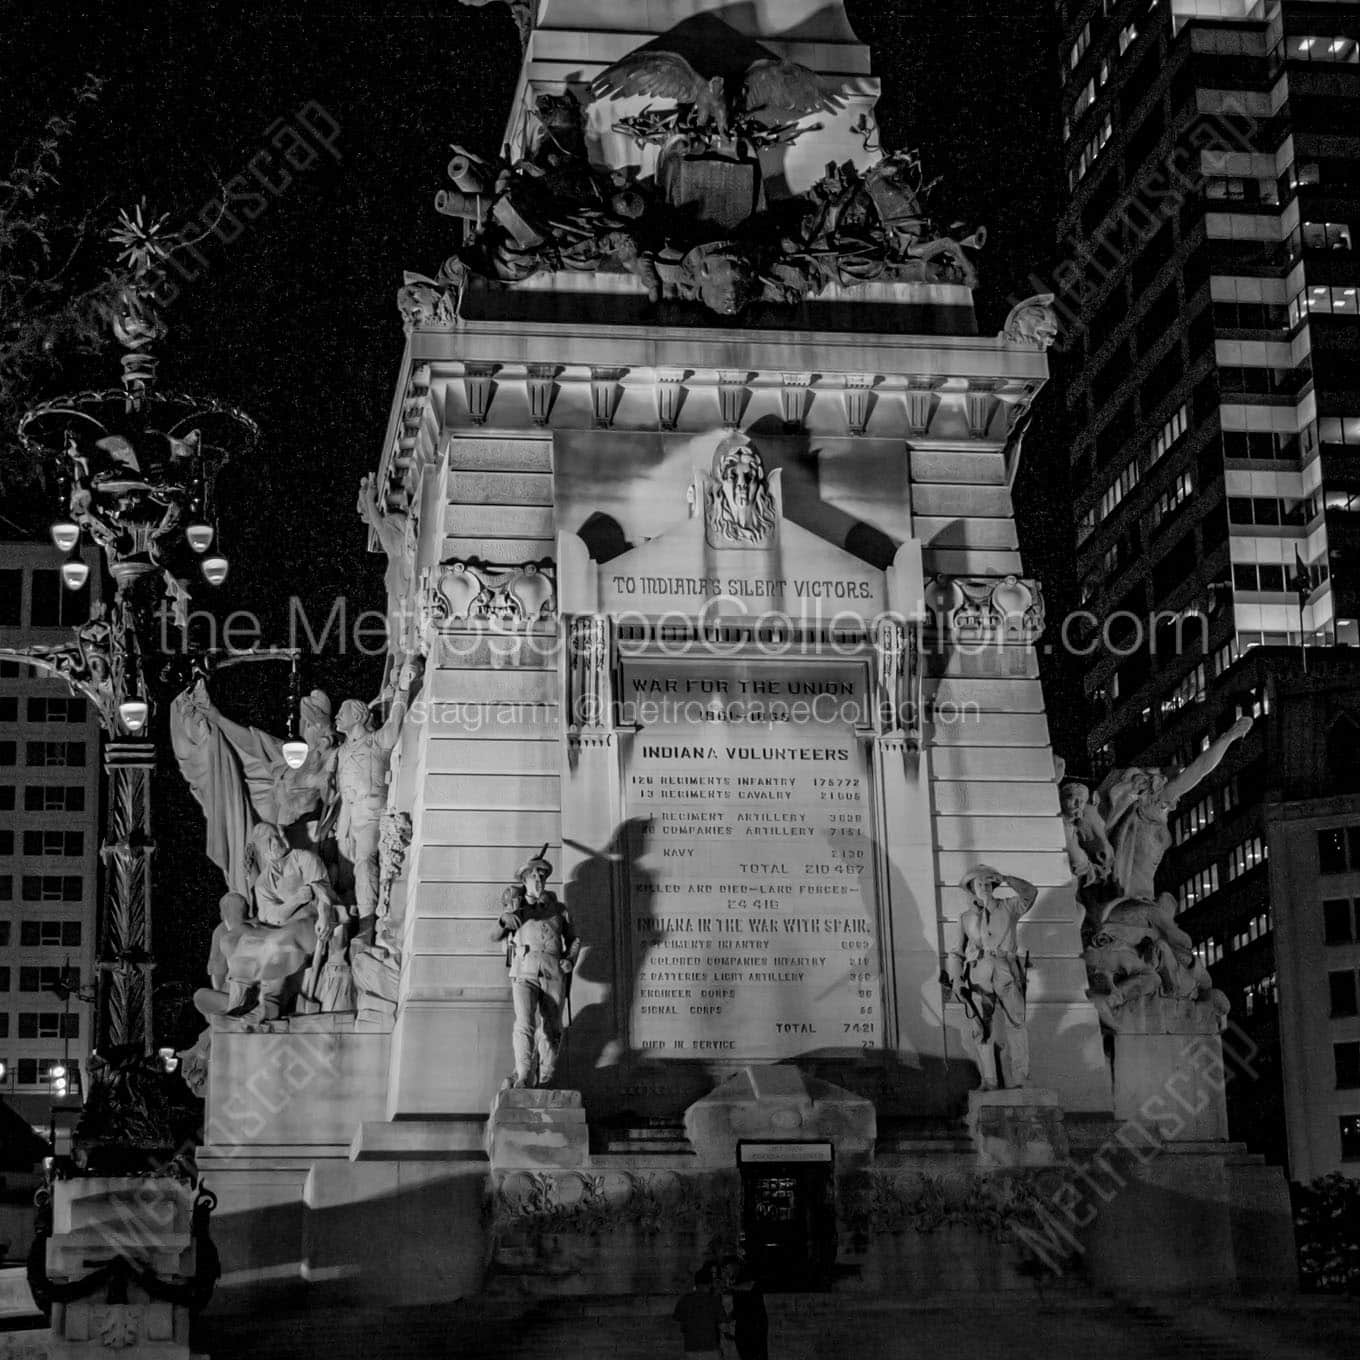 soldiers sailors monument at night Black & White Wall Art